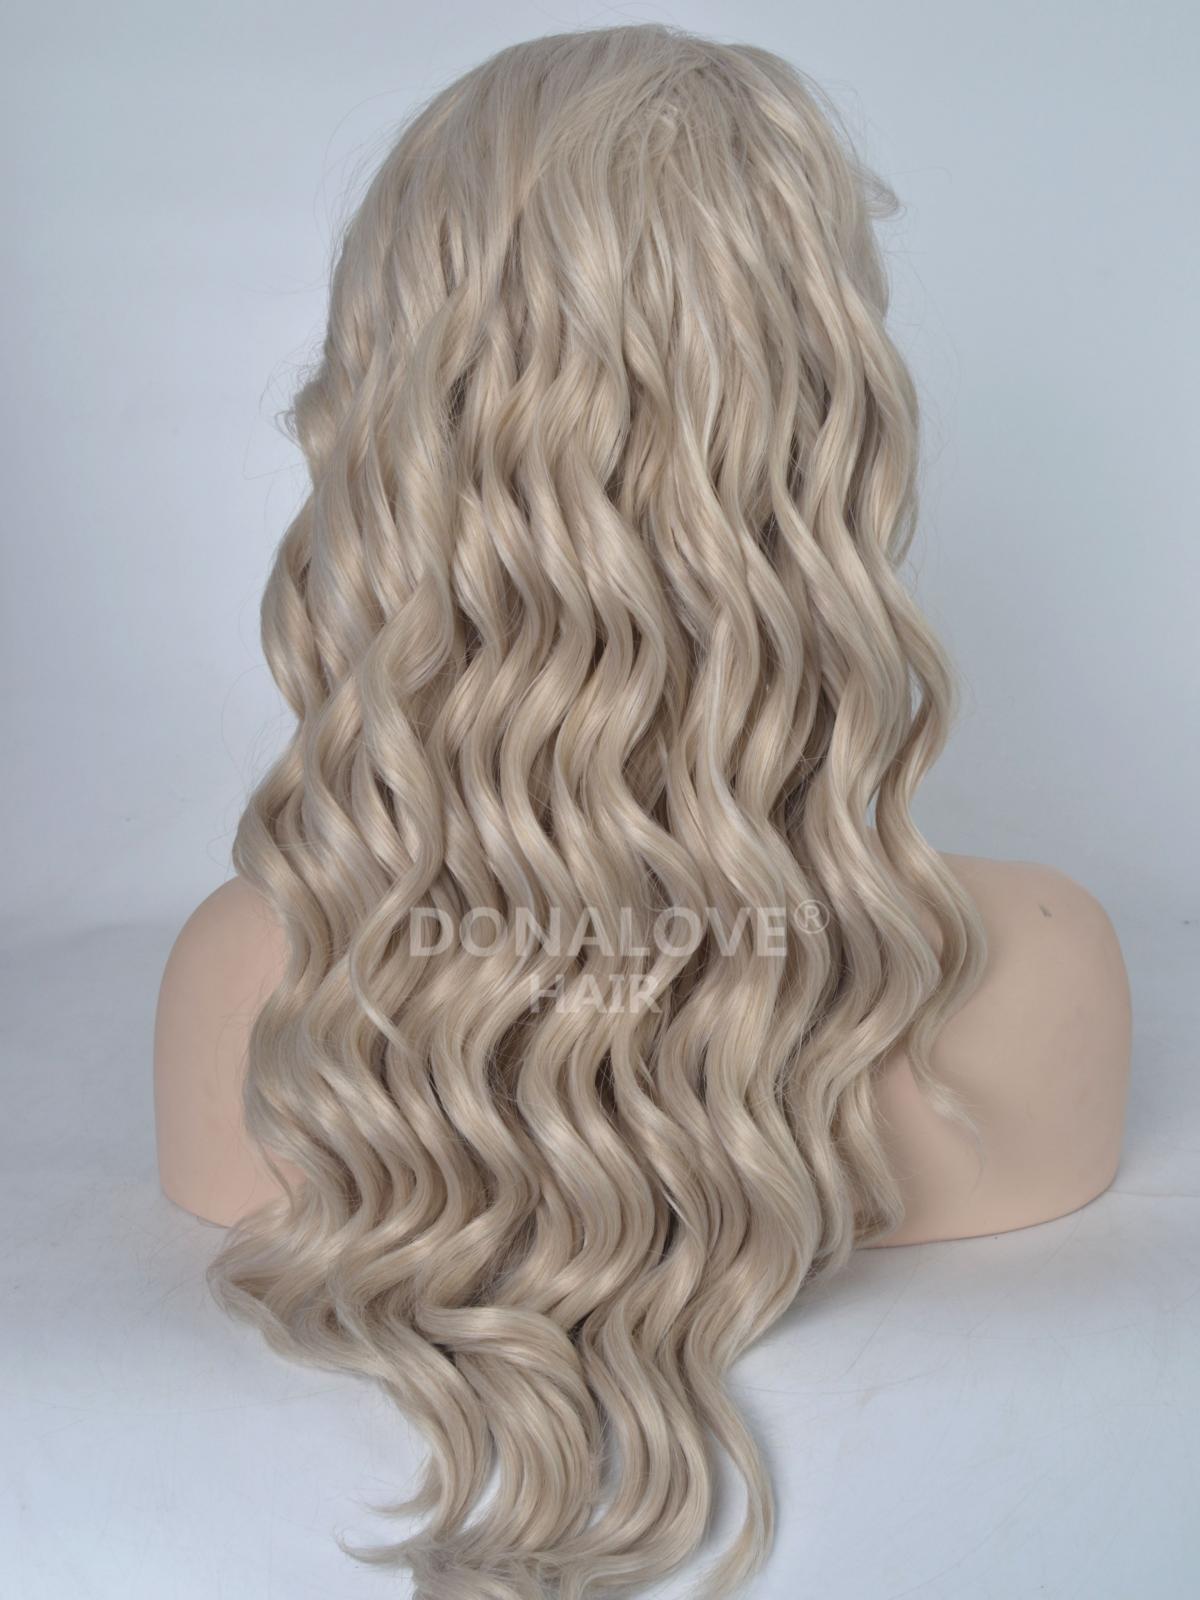 Blonde Long Wavy Synthetic Lace Front Wig-SNY038 - SYNTHETIC WIGS ...